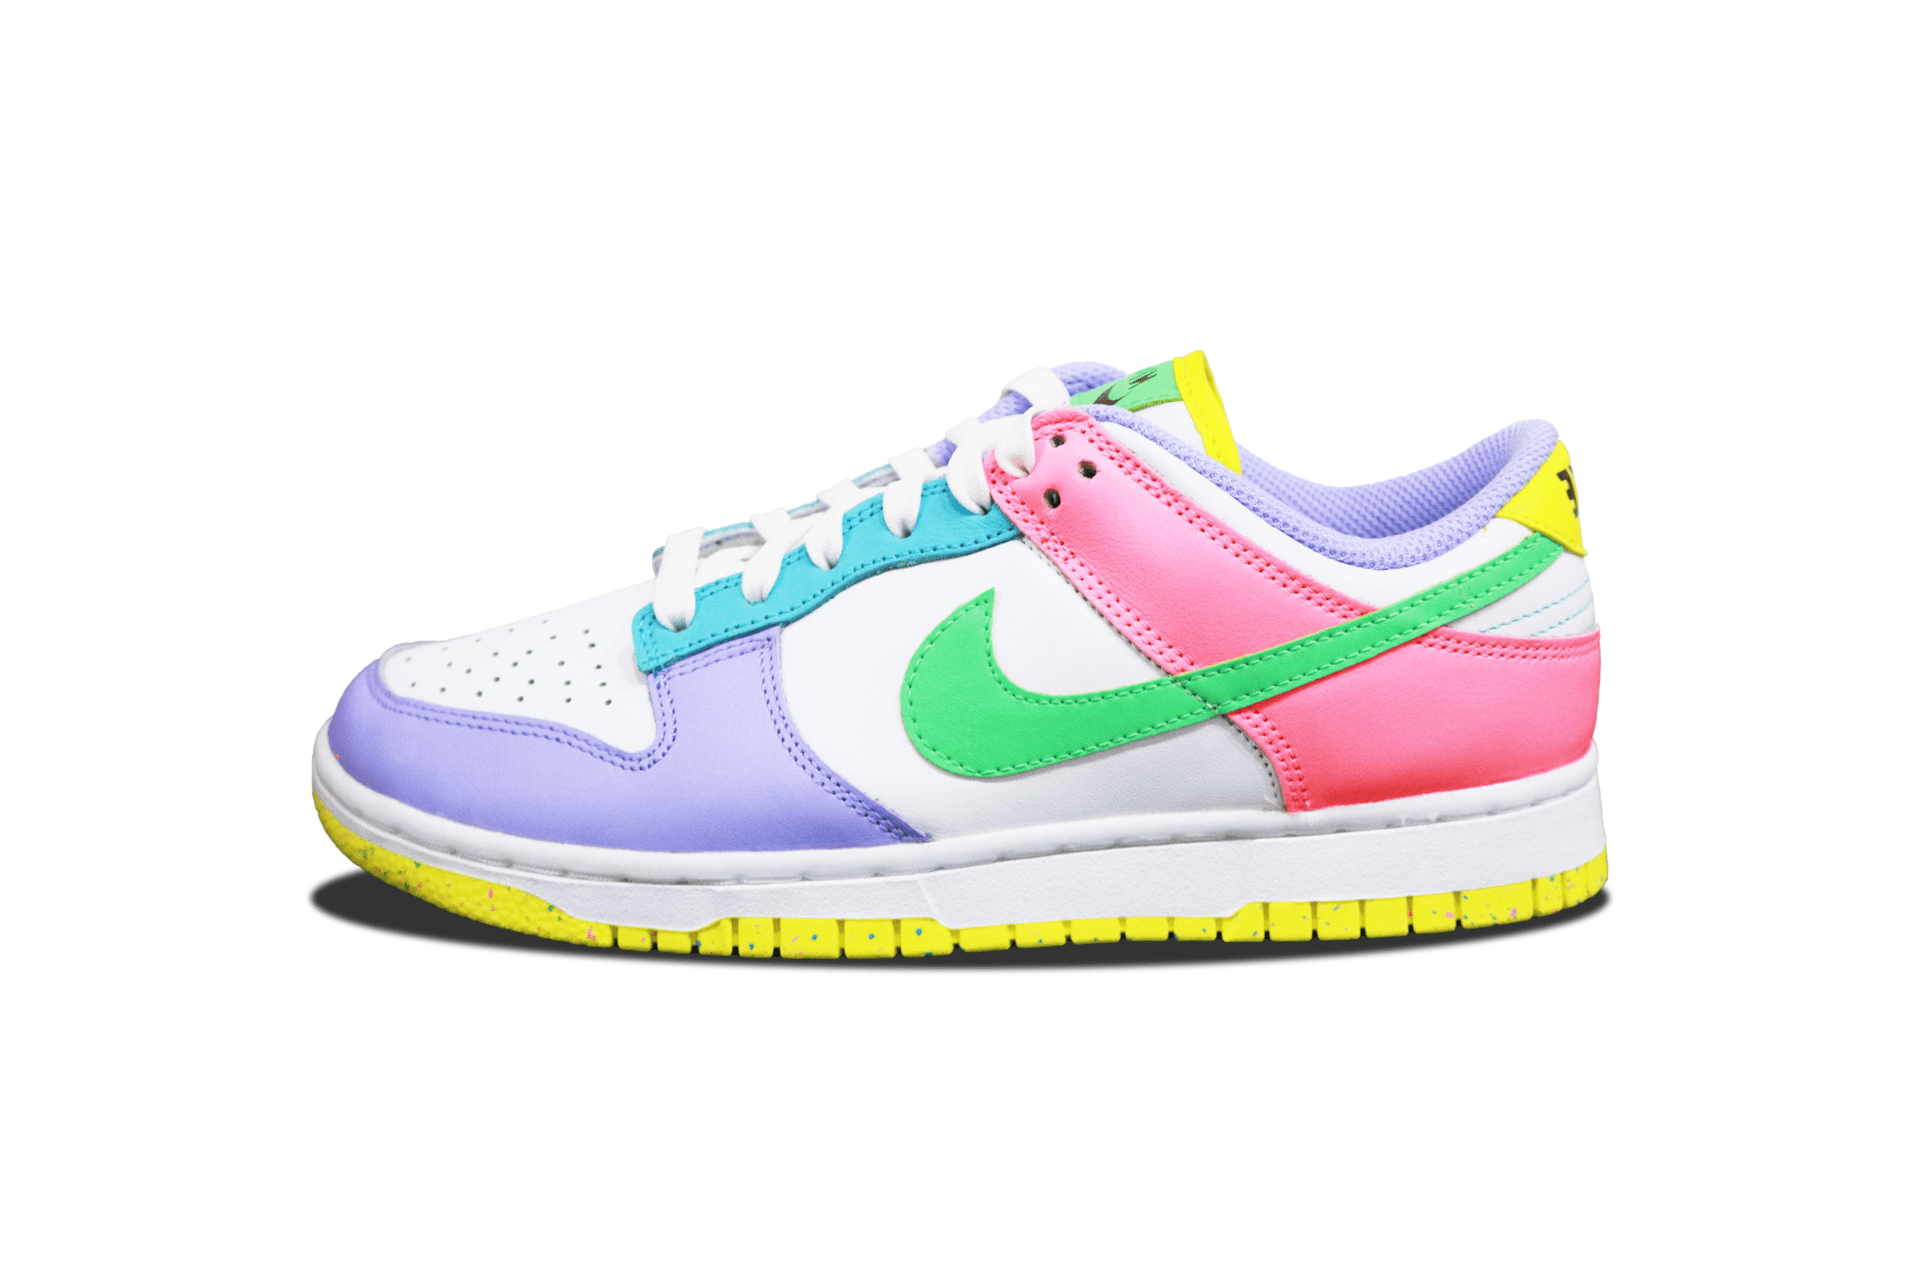 NIKE DUNK LOW EASTER CANDY - Kicksdaily